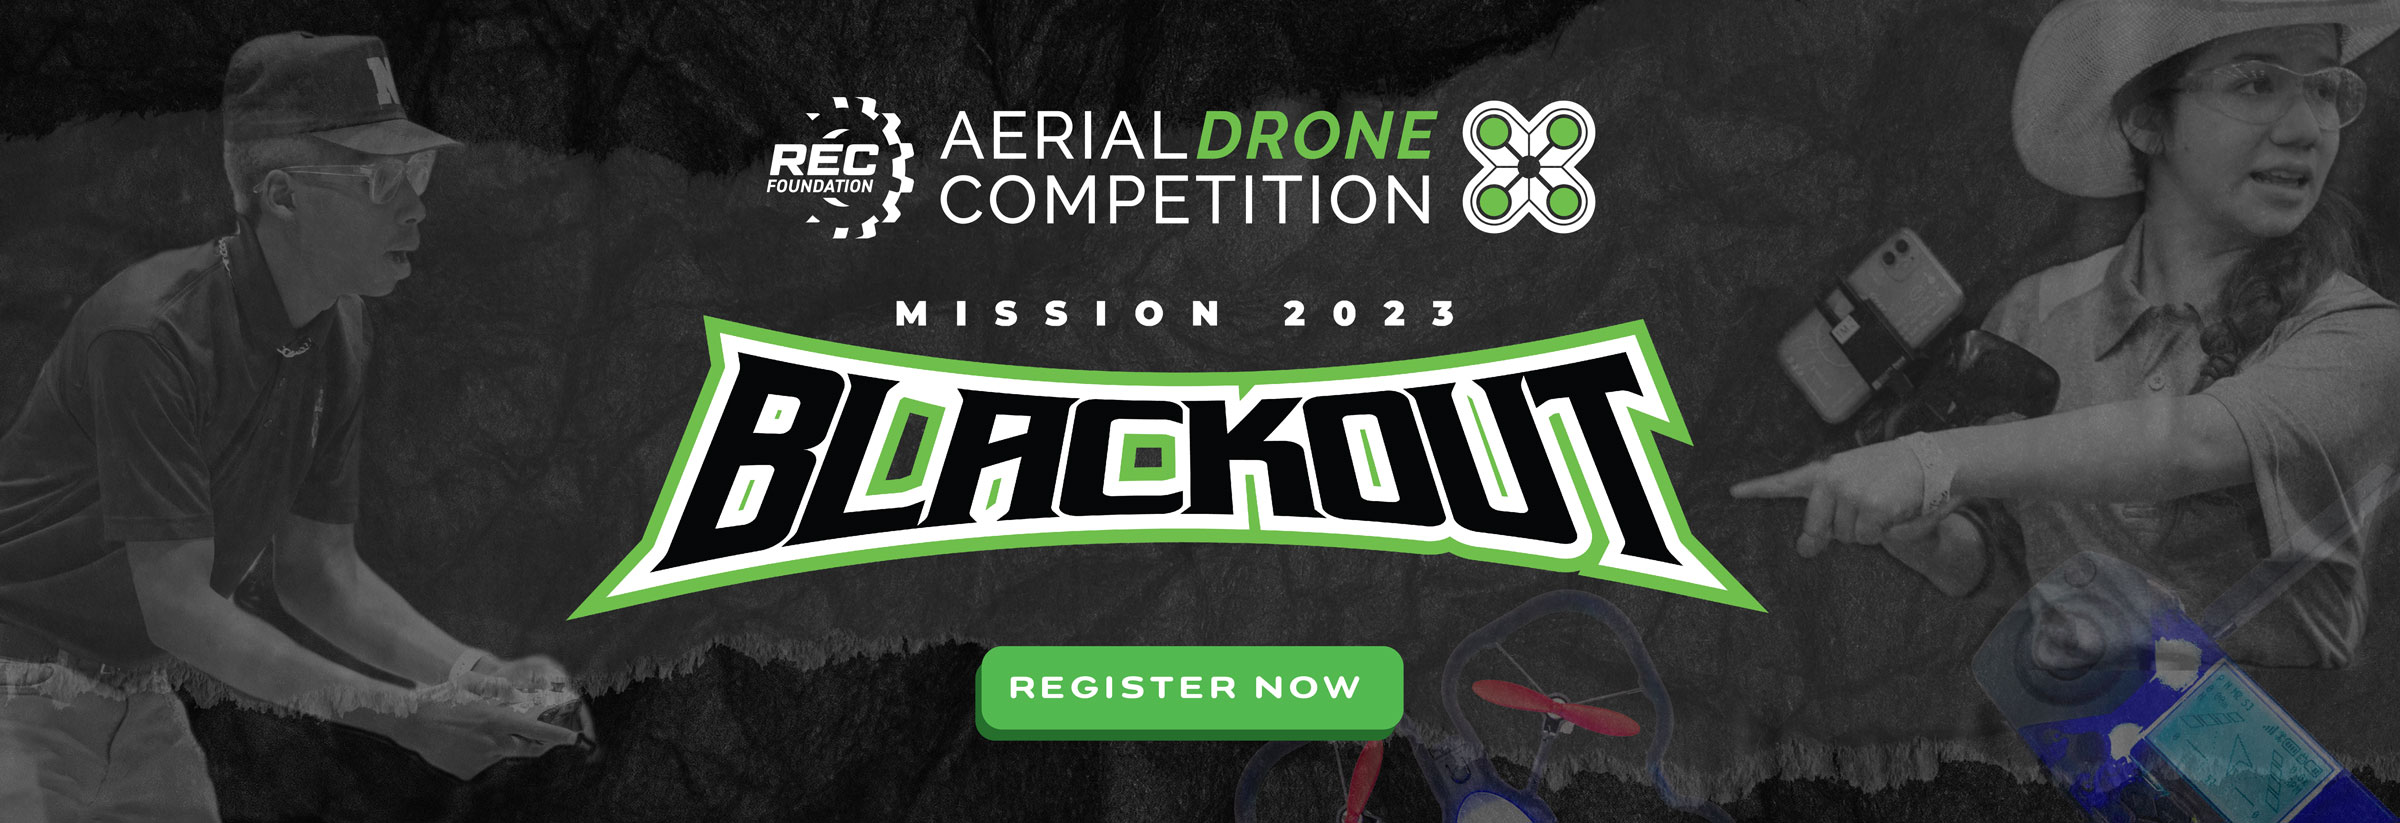 Aerial Drone Competition Mission 2023: Blackout